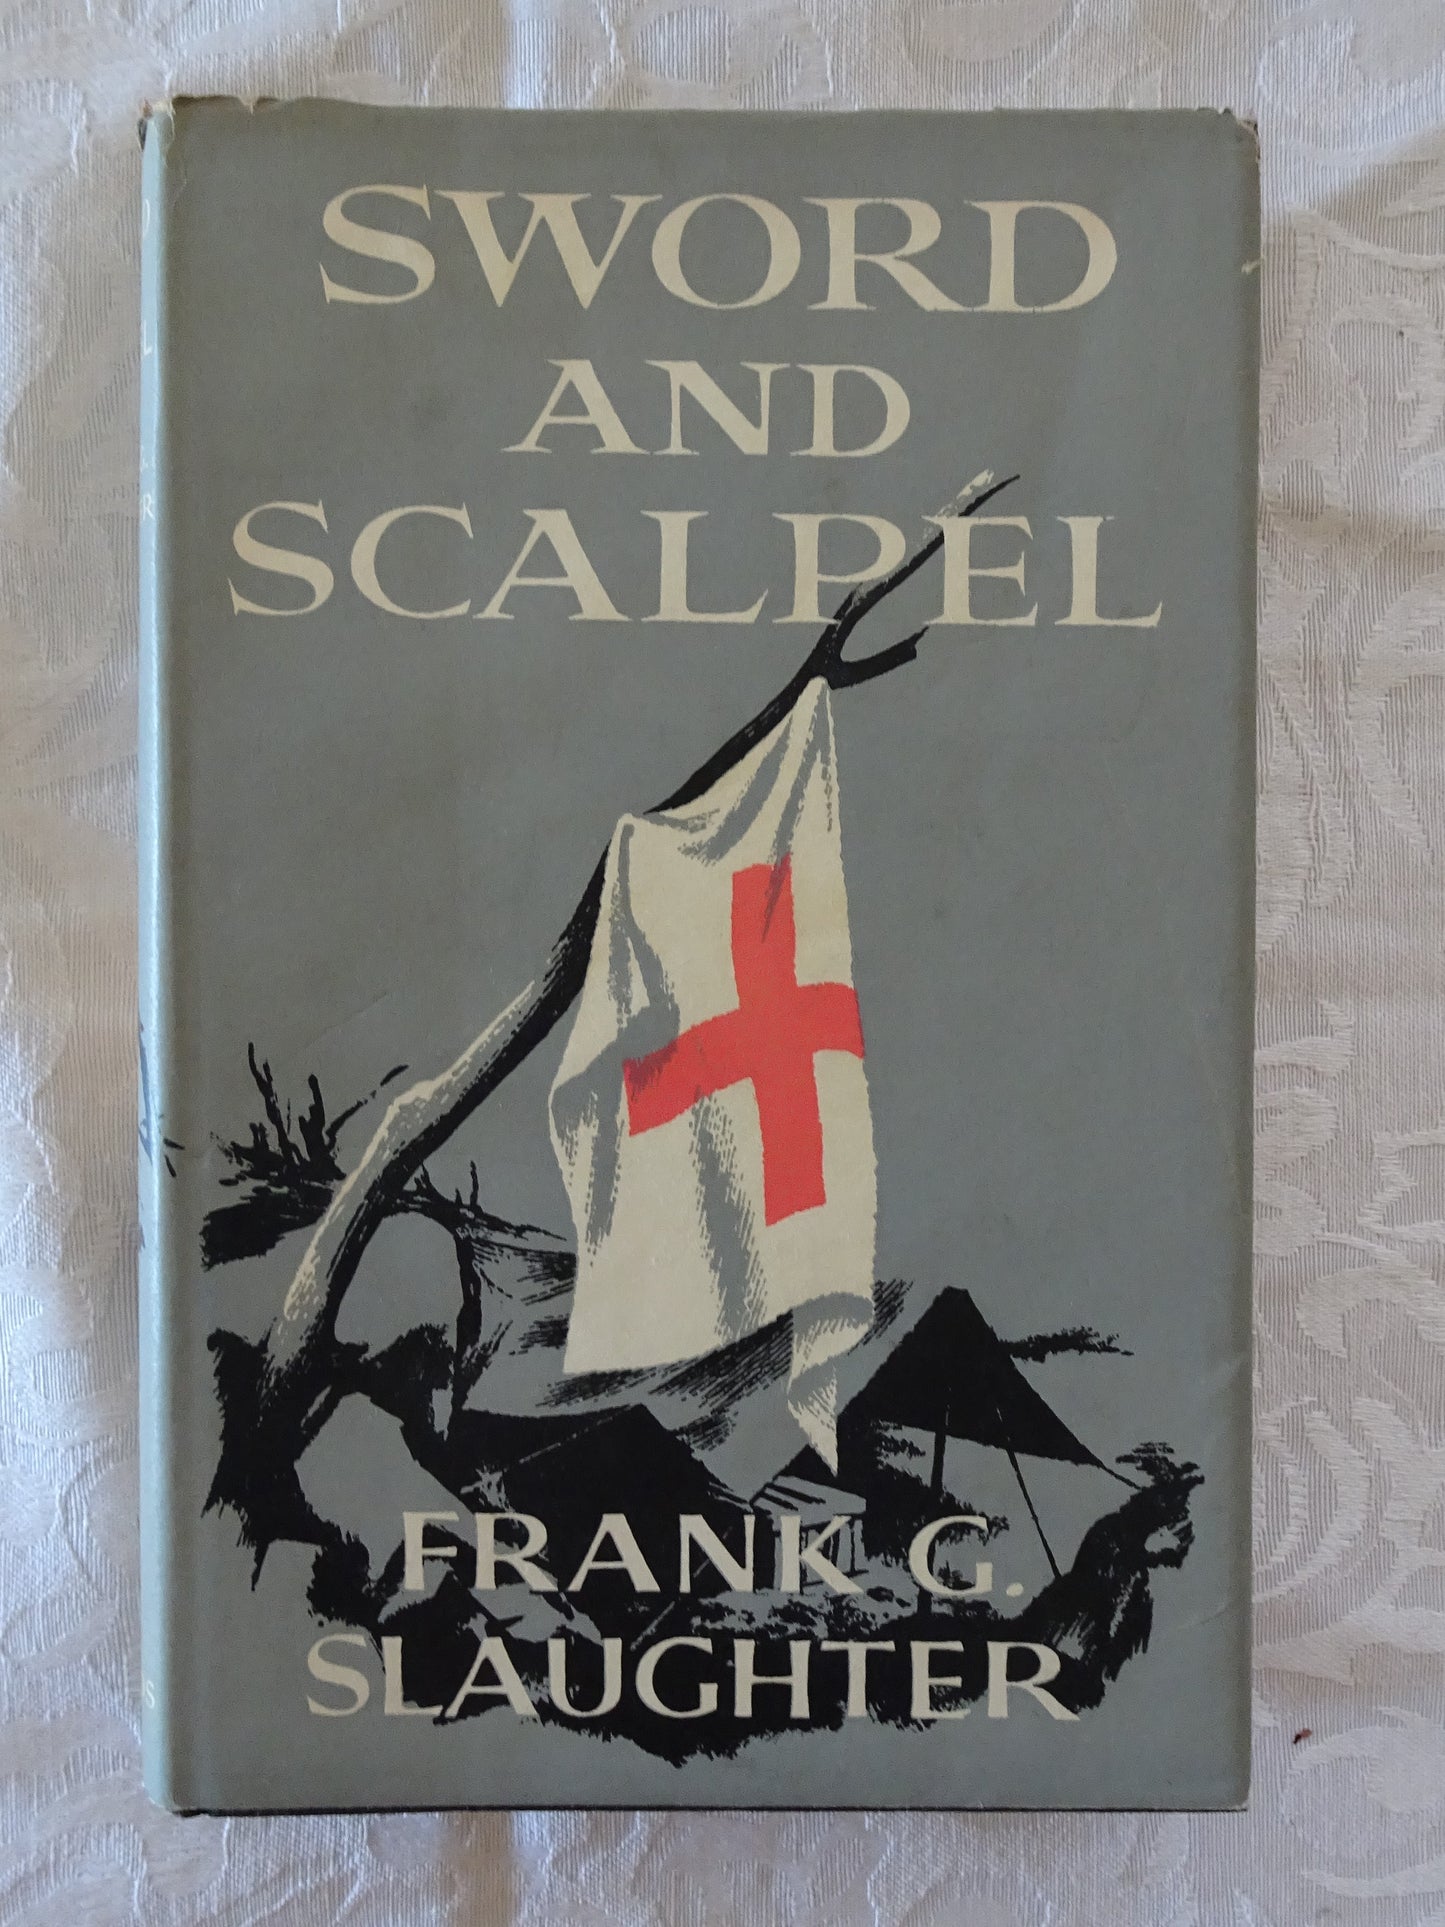 Sword and Scalpel  by Frank G. Slaughter